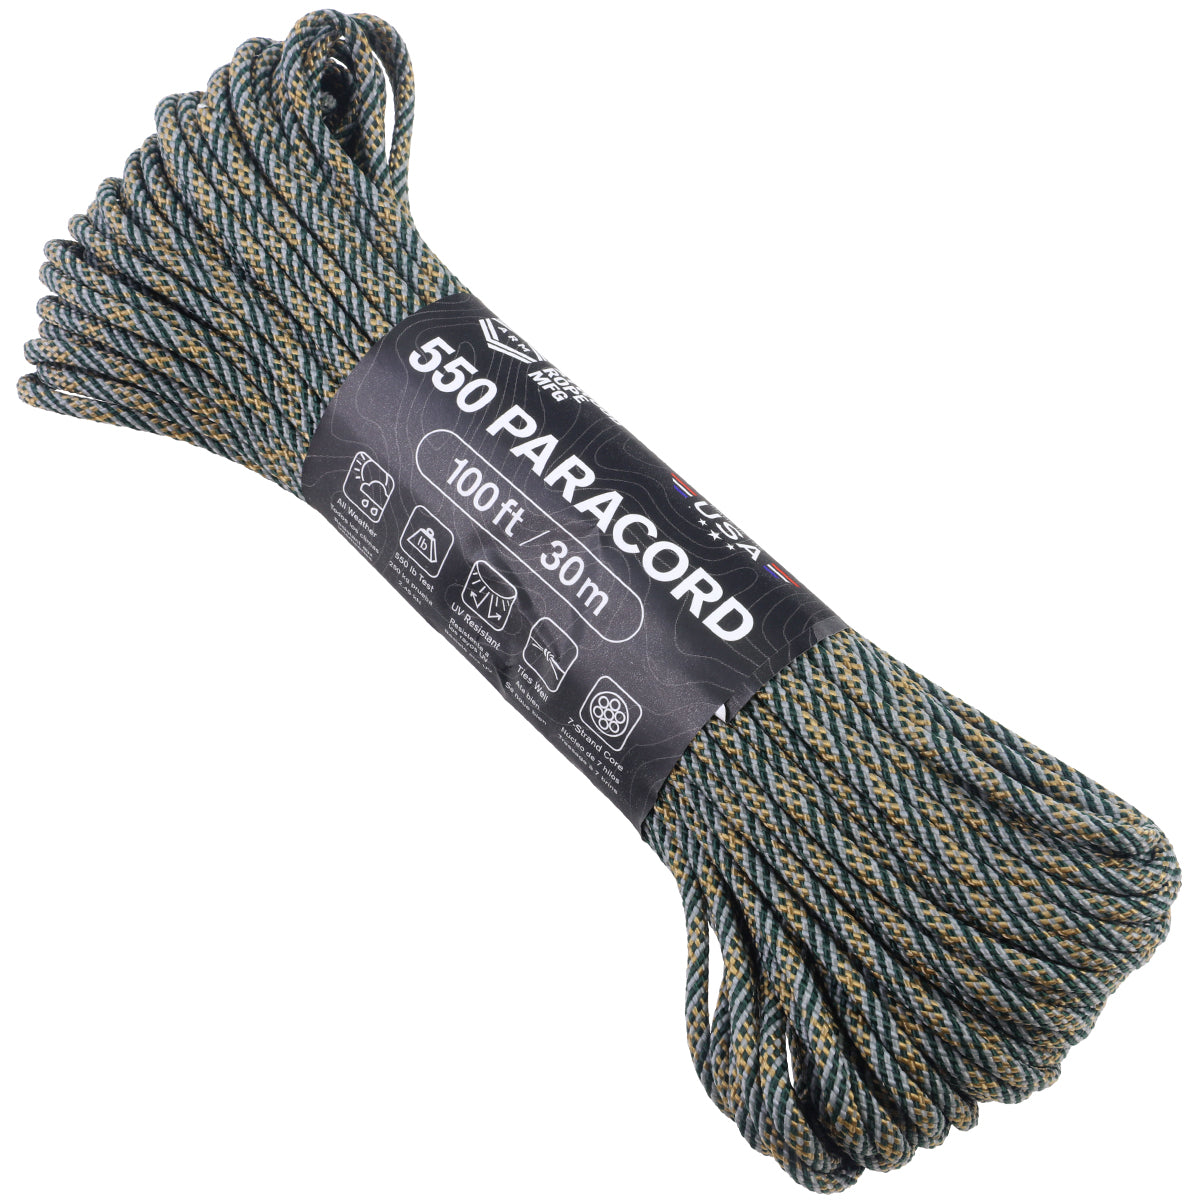 Atwood Rope MFG 550 Paracord 100 Feet 7-Strand Core Nylon Parachute Cord  Outside Survival Gear Made in USA